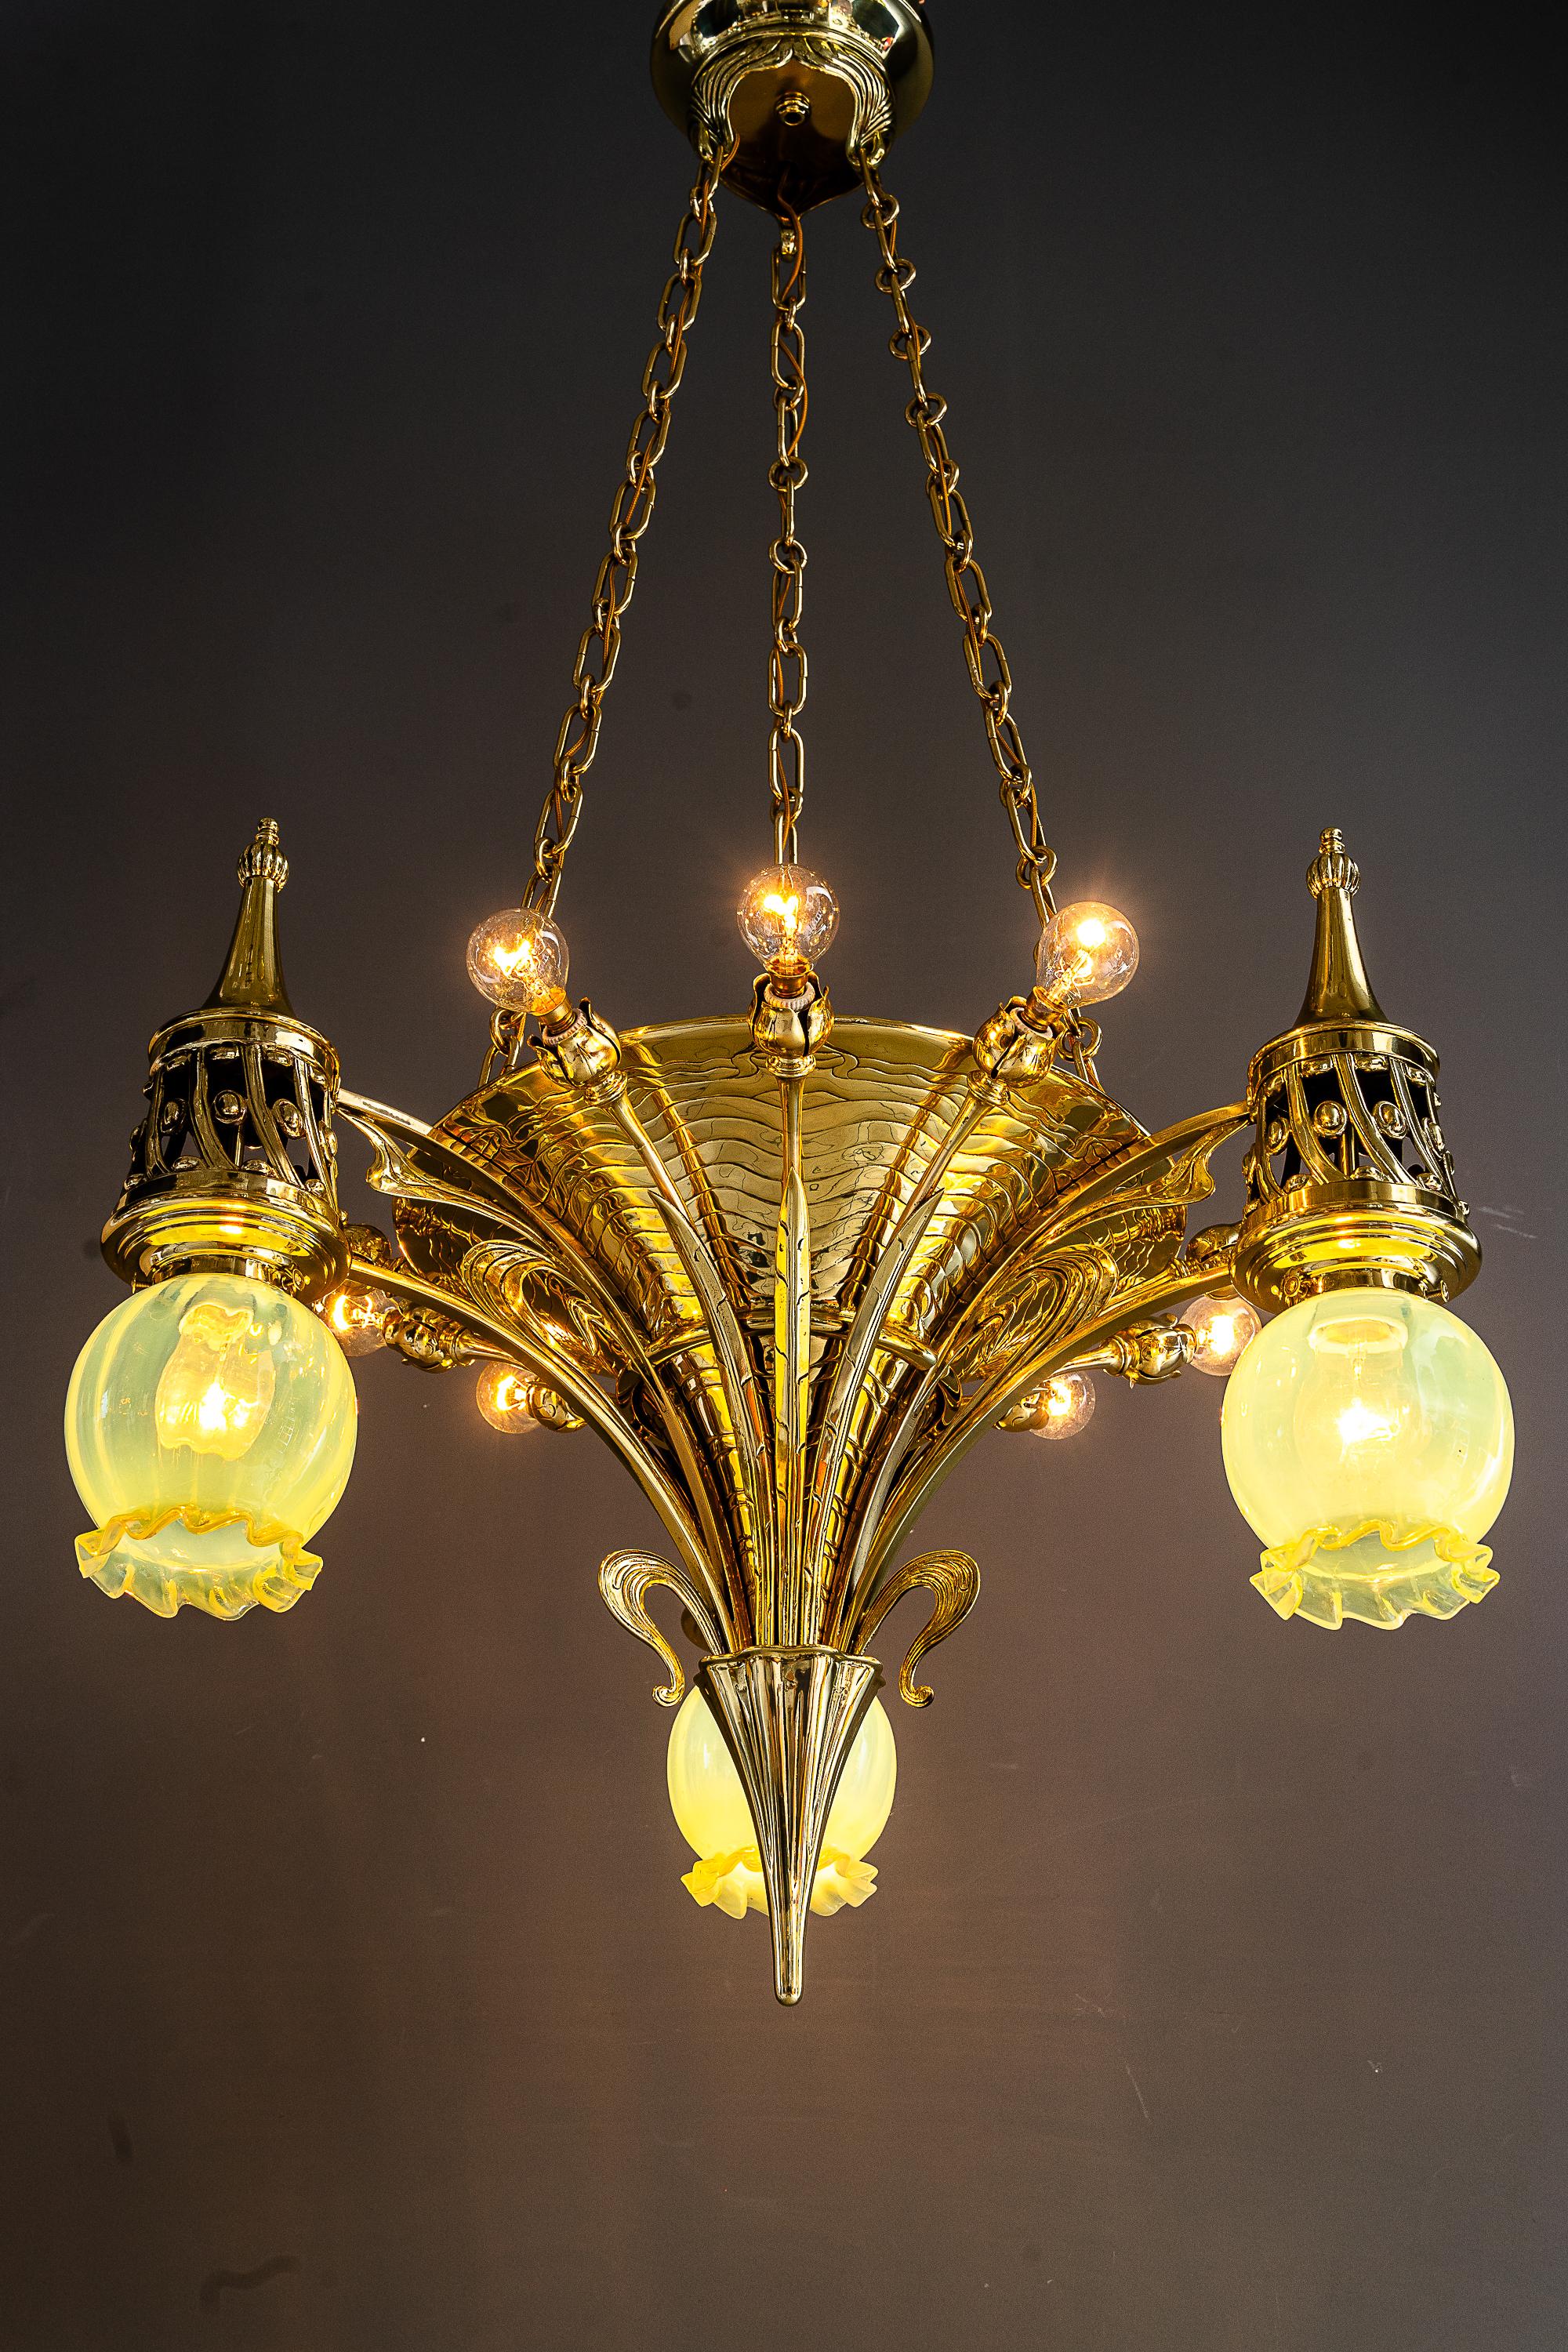 Rare Jugendstil Chandelier with opaline glass shades vienna around 1908 
Brass polished and stove enameled
Original opaline glass shades
12 Bulbs